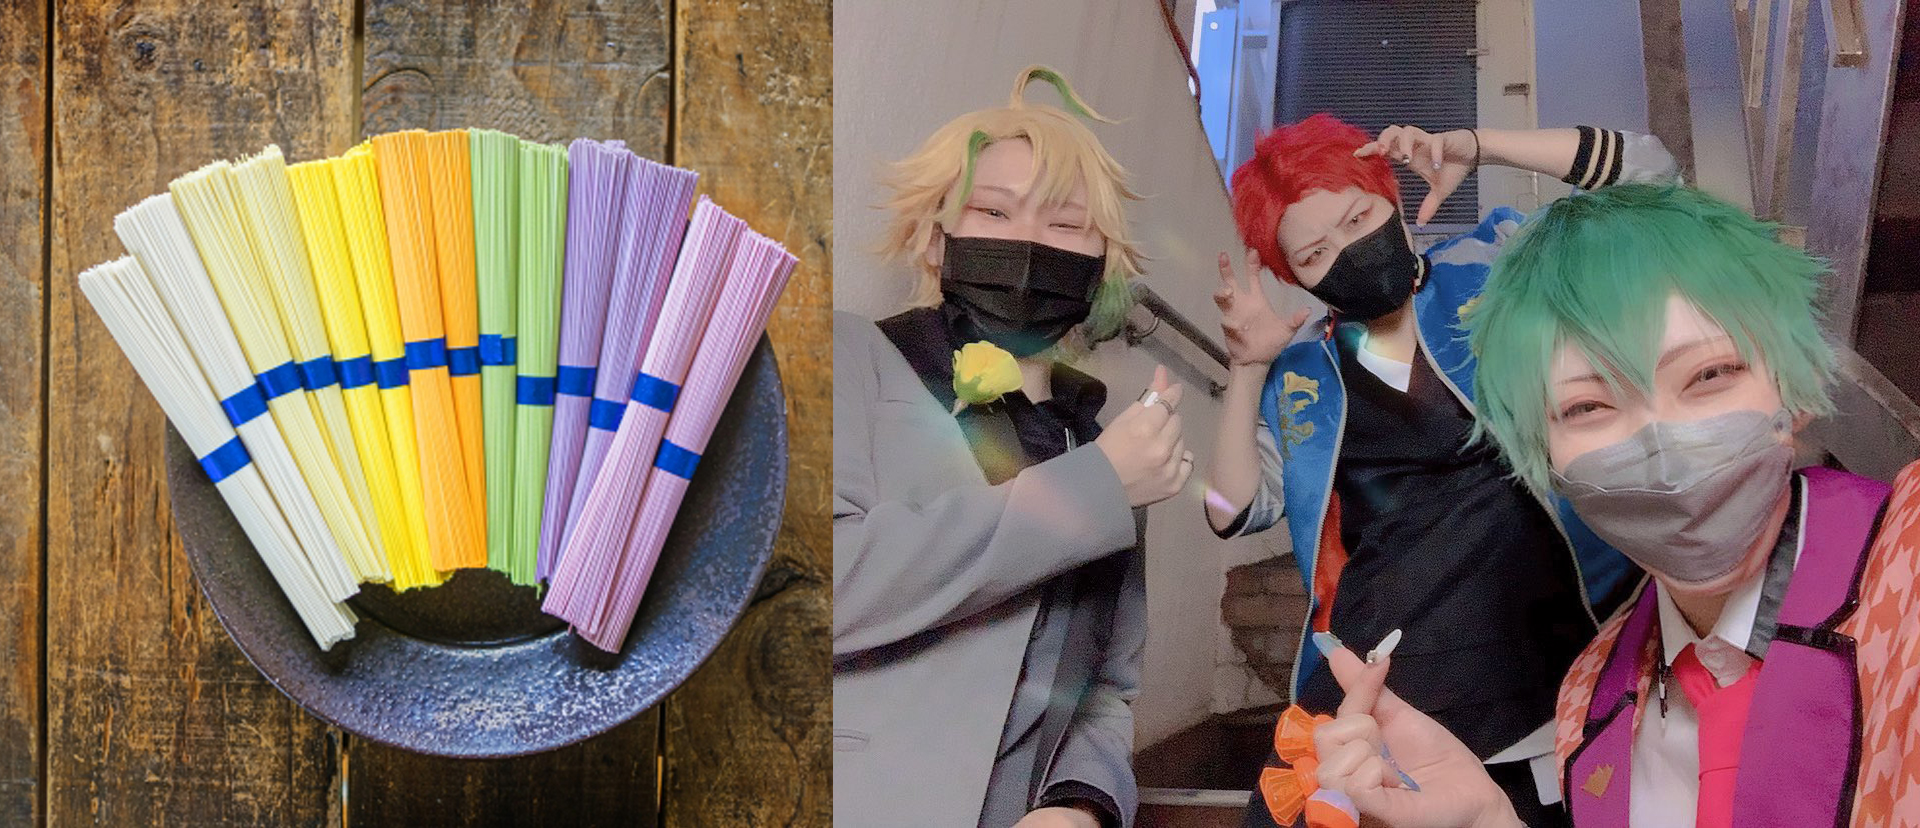 Can we eat our “faves’ hairs”…? About this Otaku’s food event, there are comments like “The CRAZIEST thing” and “I’ve never thought of this idea”